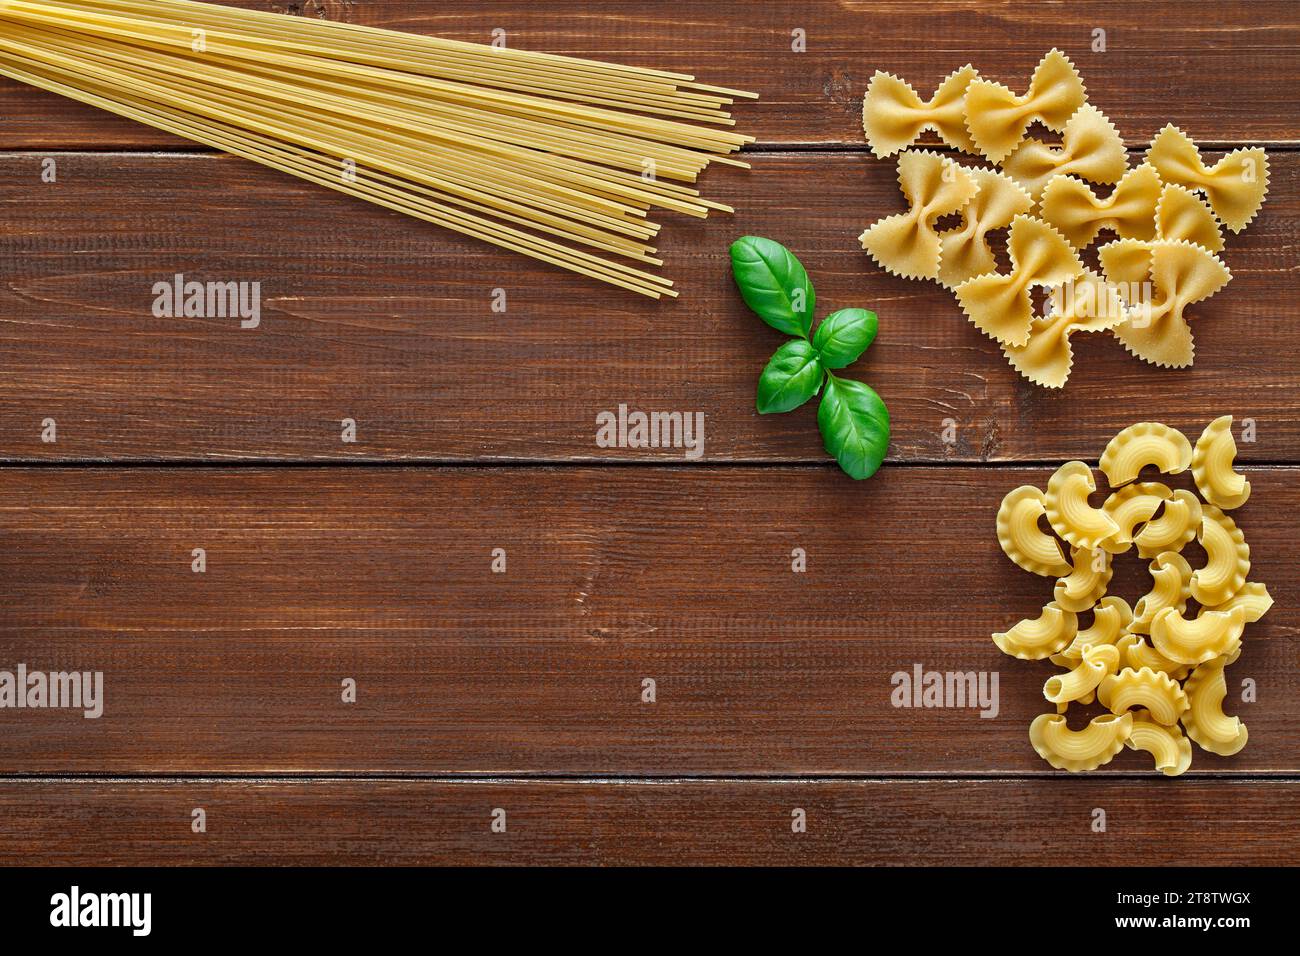 Spaghetti, maccheroni raw, farfalle, cresta di gallo, and green leaves of basil on wooden brown planks dark background, top view, space to copy text. Stock Photo